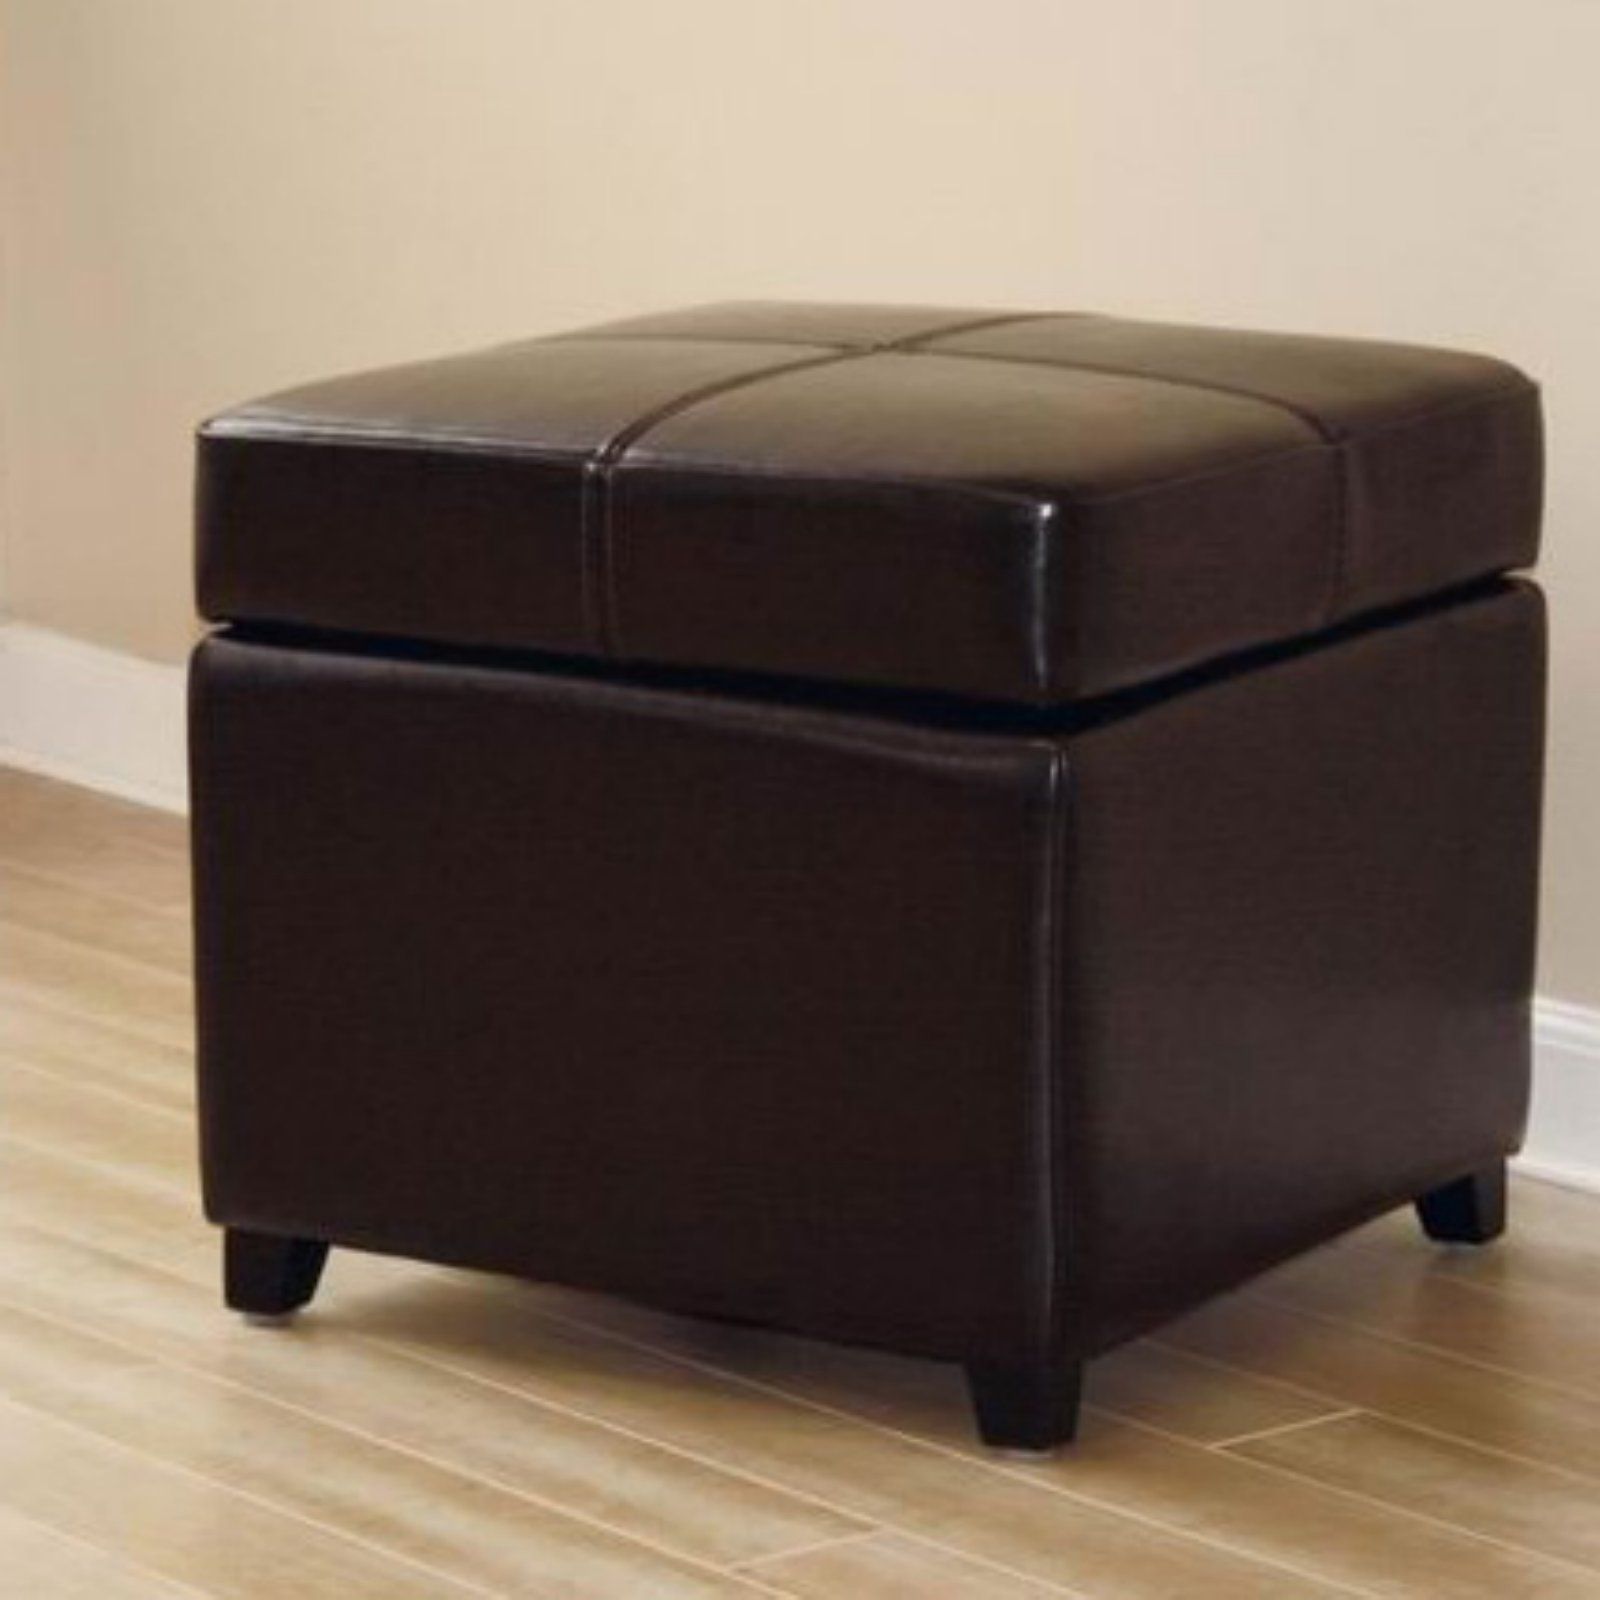 Baxton Studio Black Full Leather Storage Cube Ottoman – Walmart Within Well Liked Solid Cuboid Pouf Ottomans (View 5 of 10)